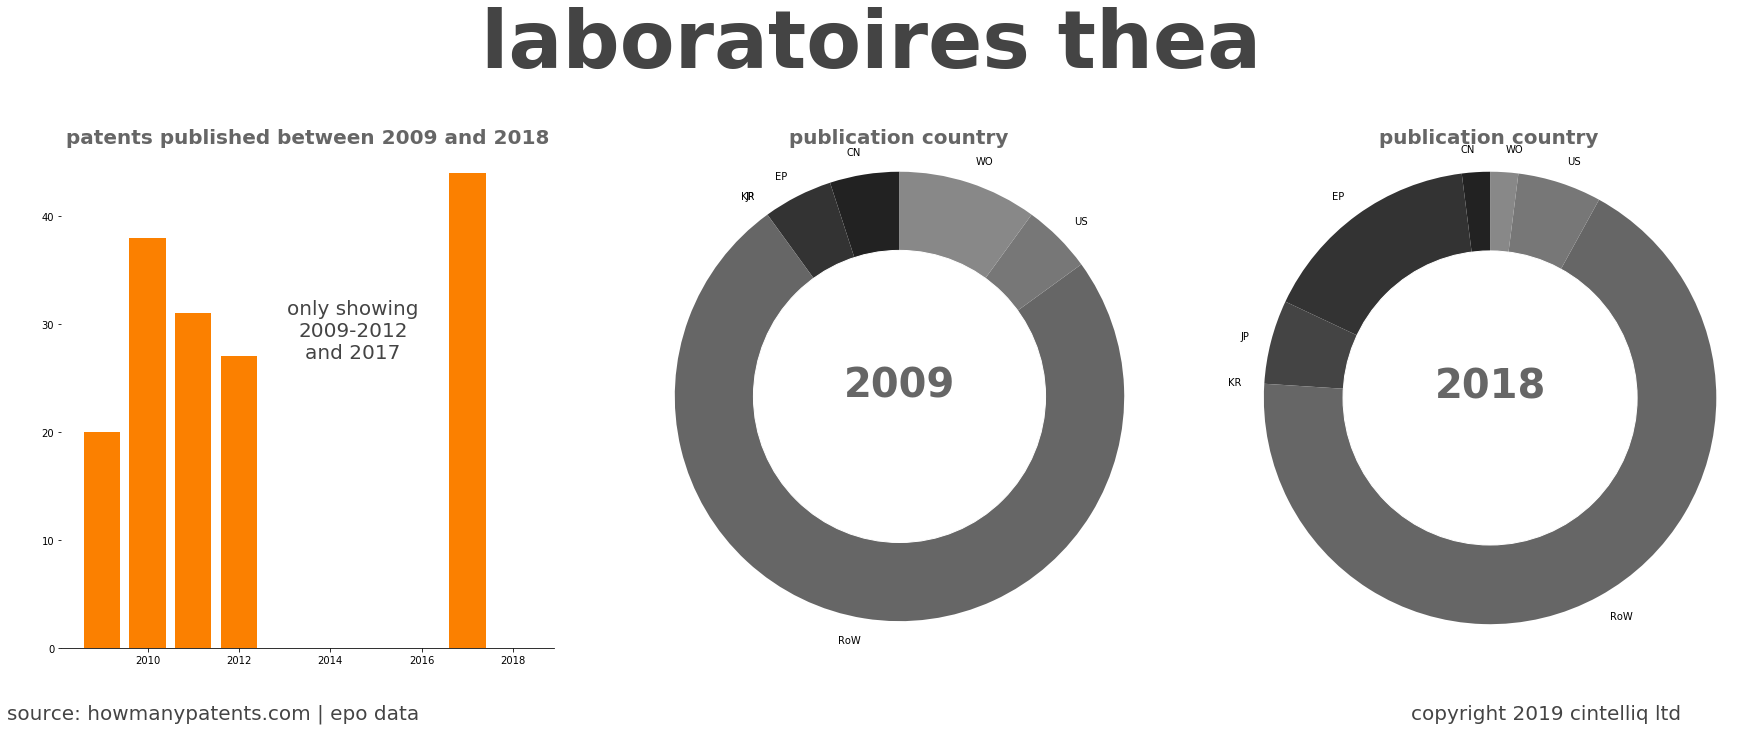 summary of patents for Laboratoires Thea